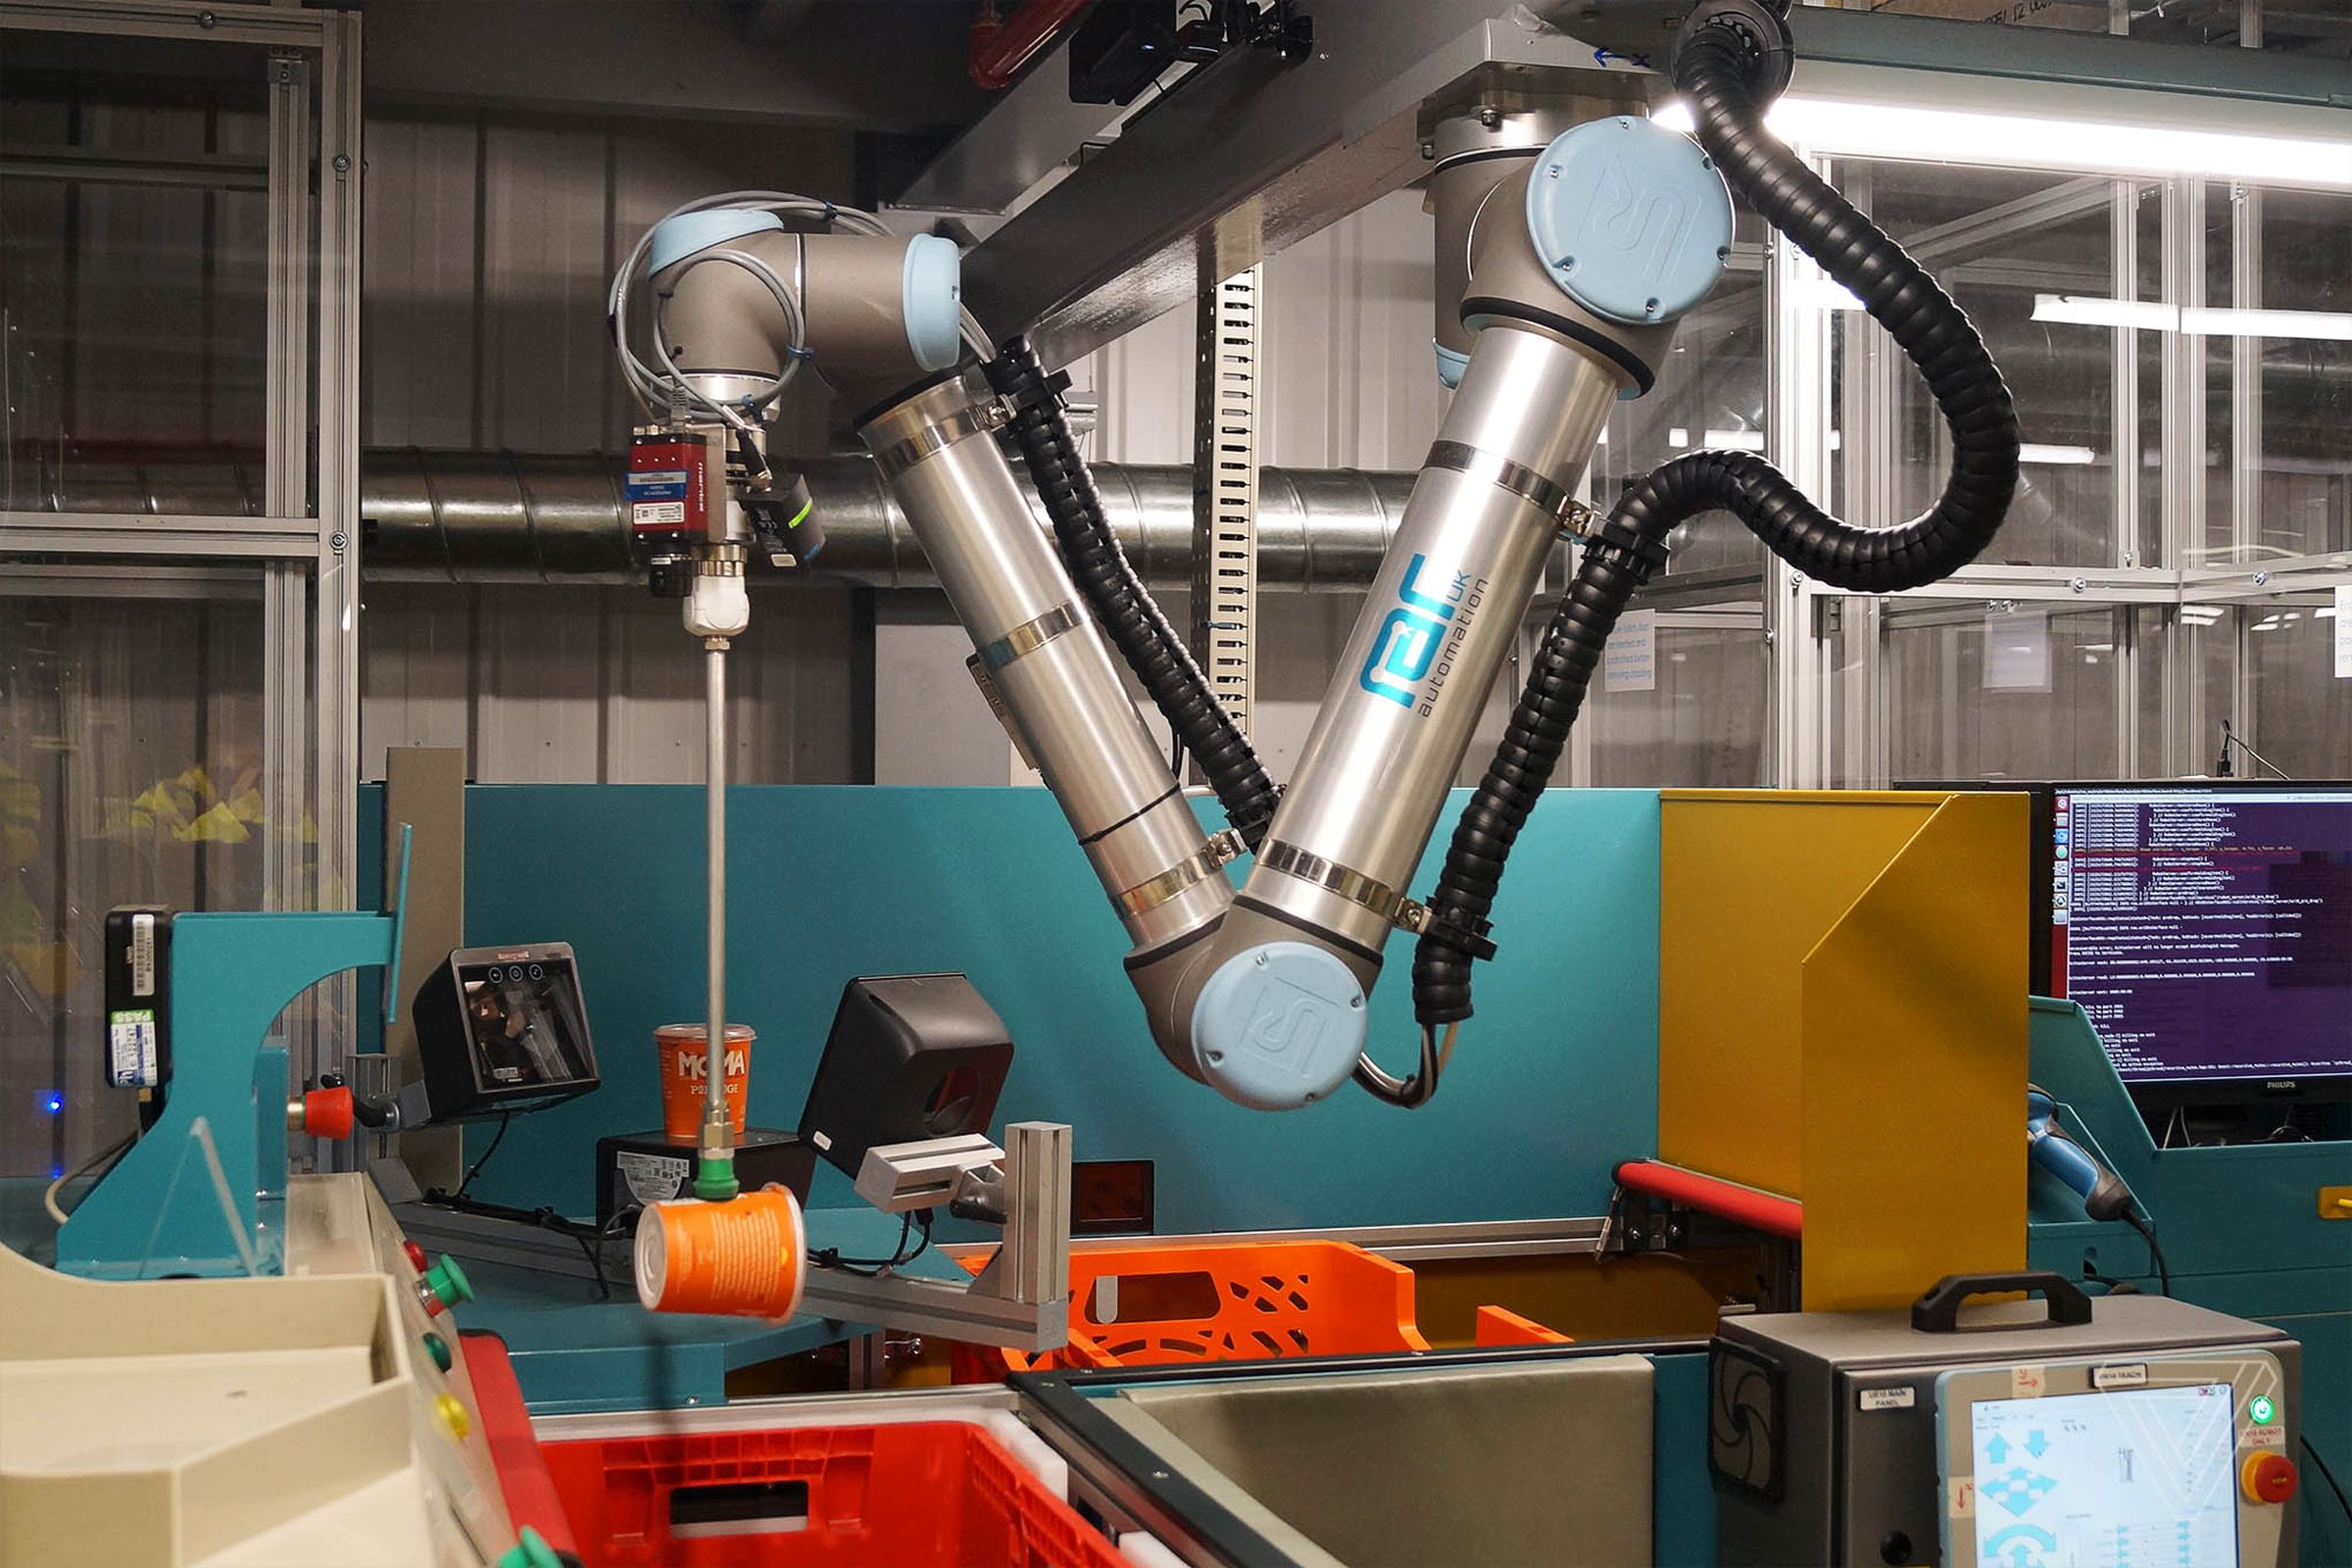 Ocado’s experimental industrial robot arm, designed to take over the work currently done by human “pickers.”